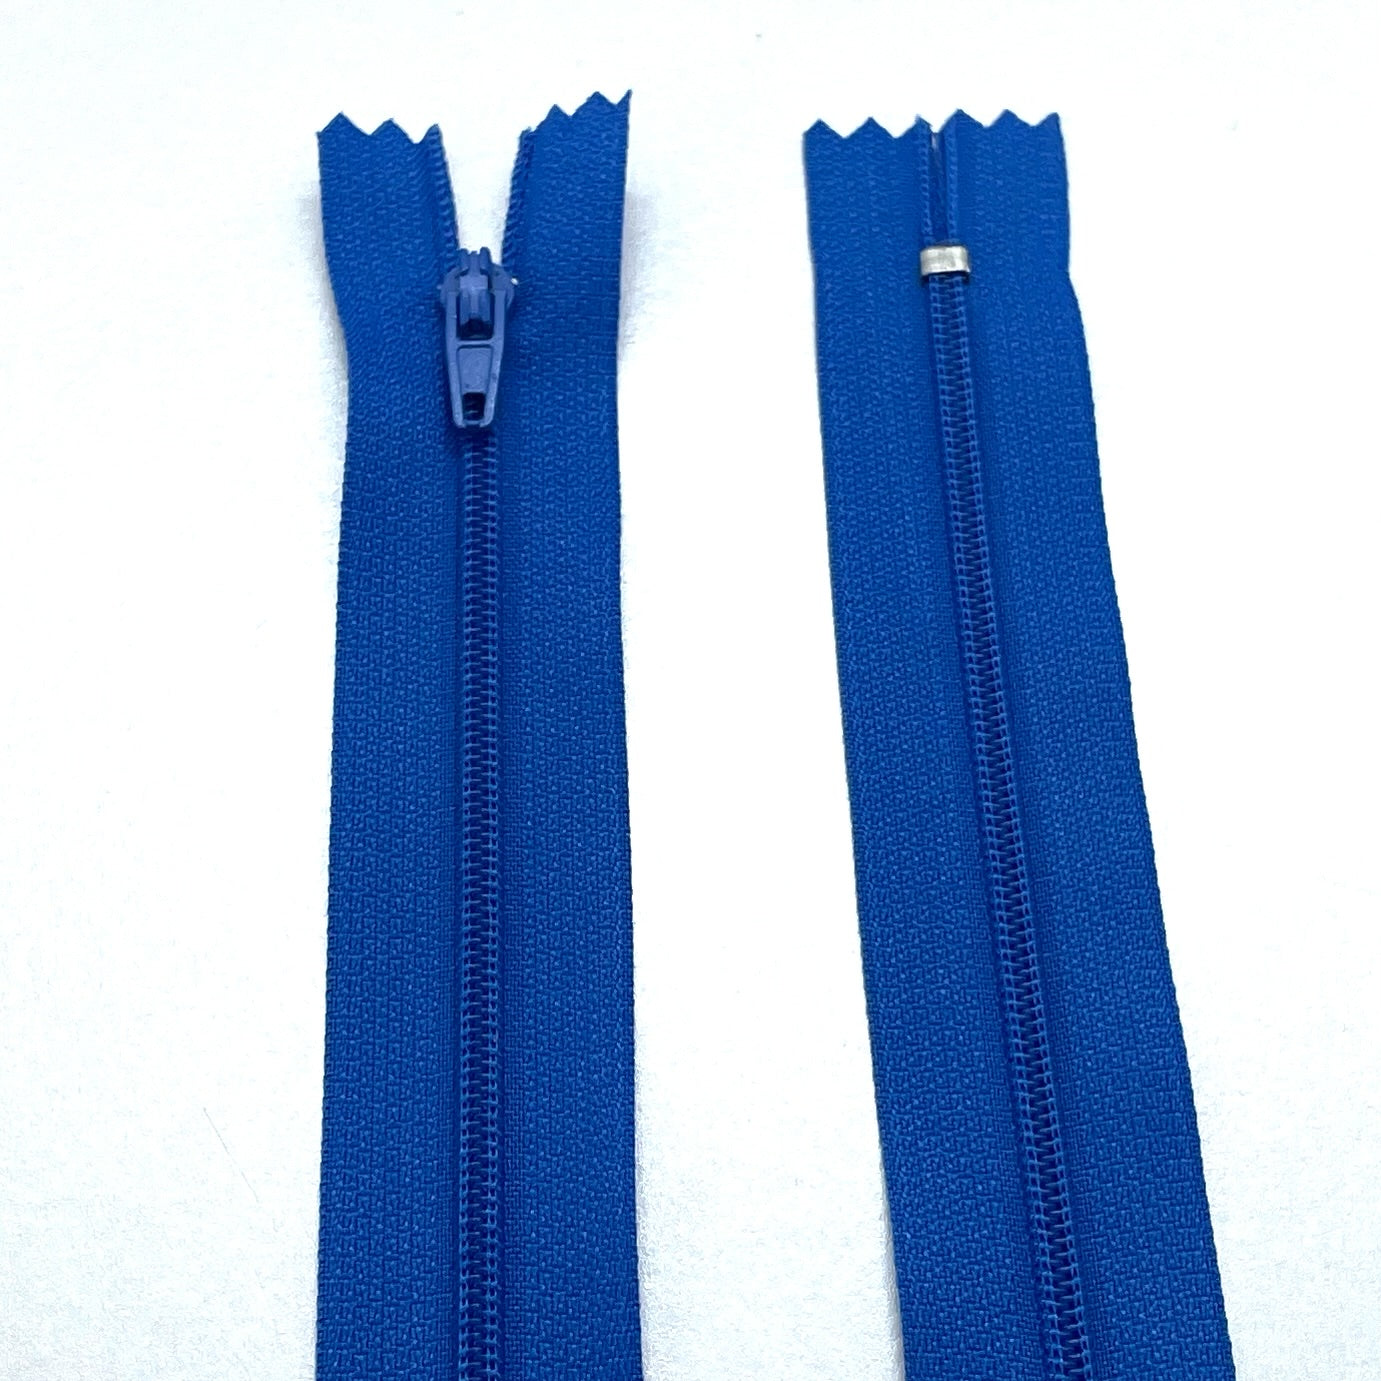 Photo of royal blue nylon zips available in 25 colors and 5 sizes. Excellent quality zippers for craft and dressmaking purposes. Perfect for dresses, skirts, trousers, bags, purses, cushions, and numerous other projects. So many possibilities, so little time!